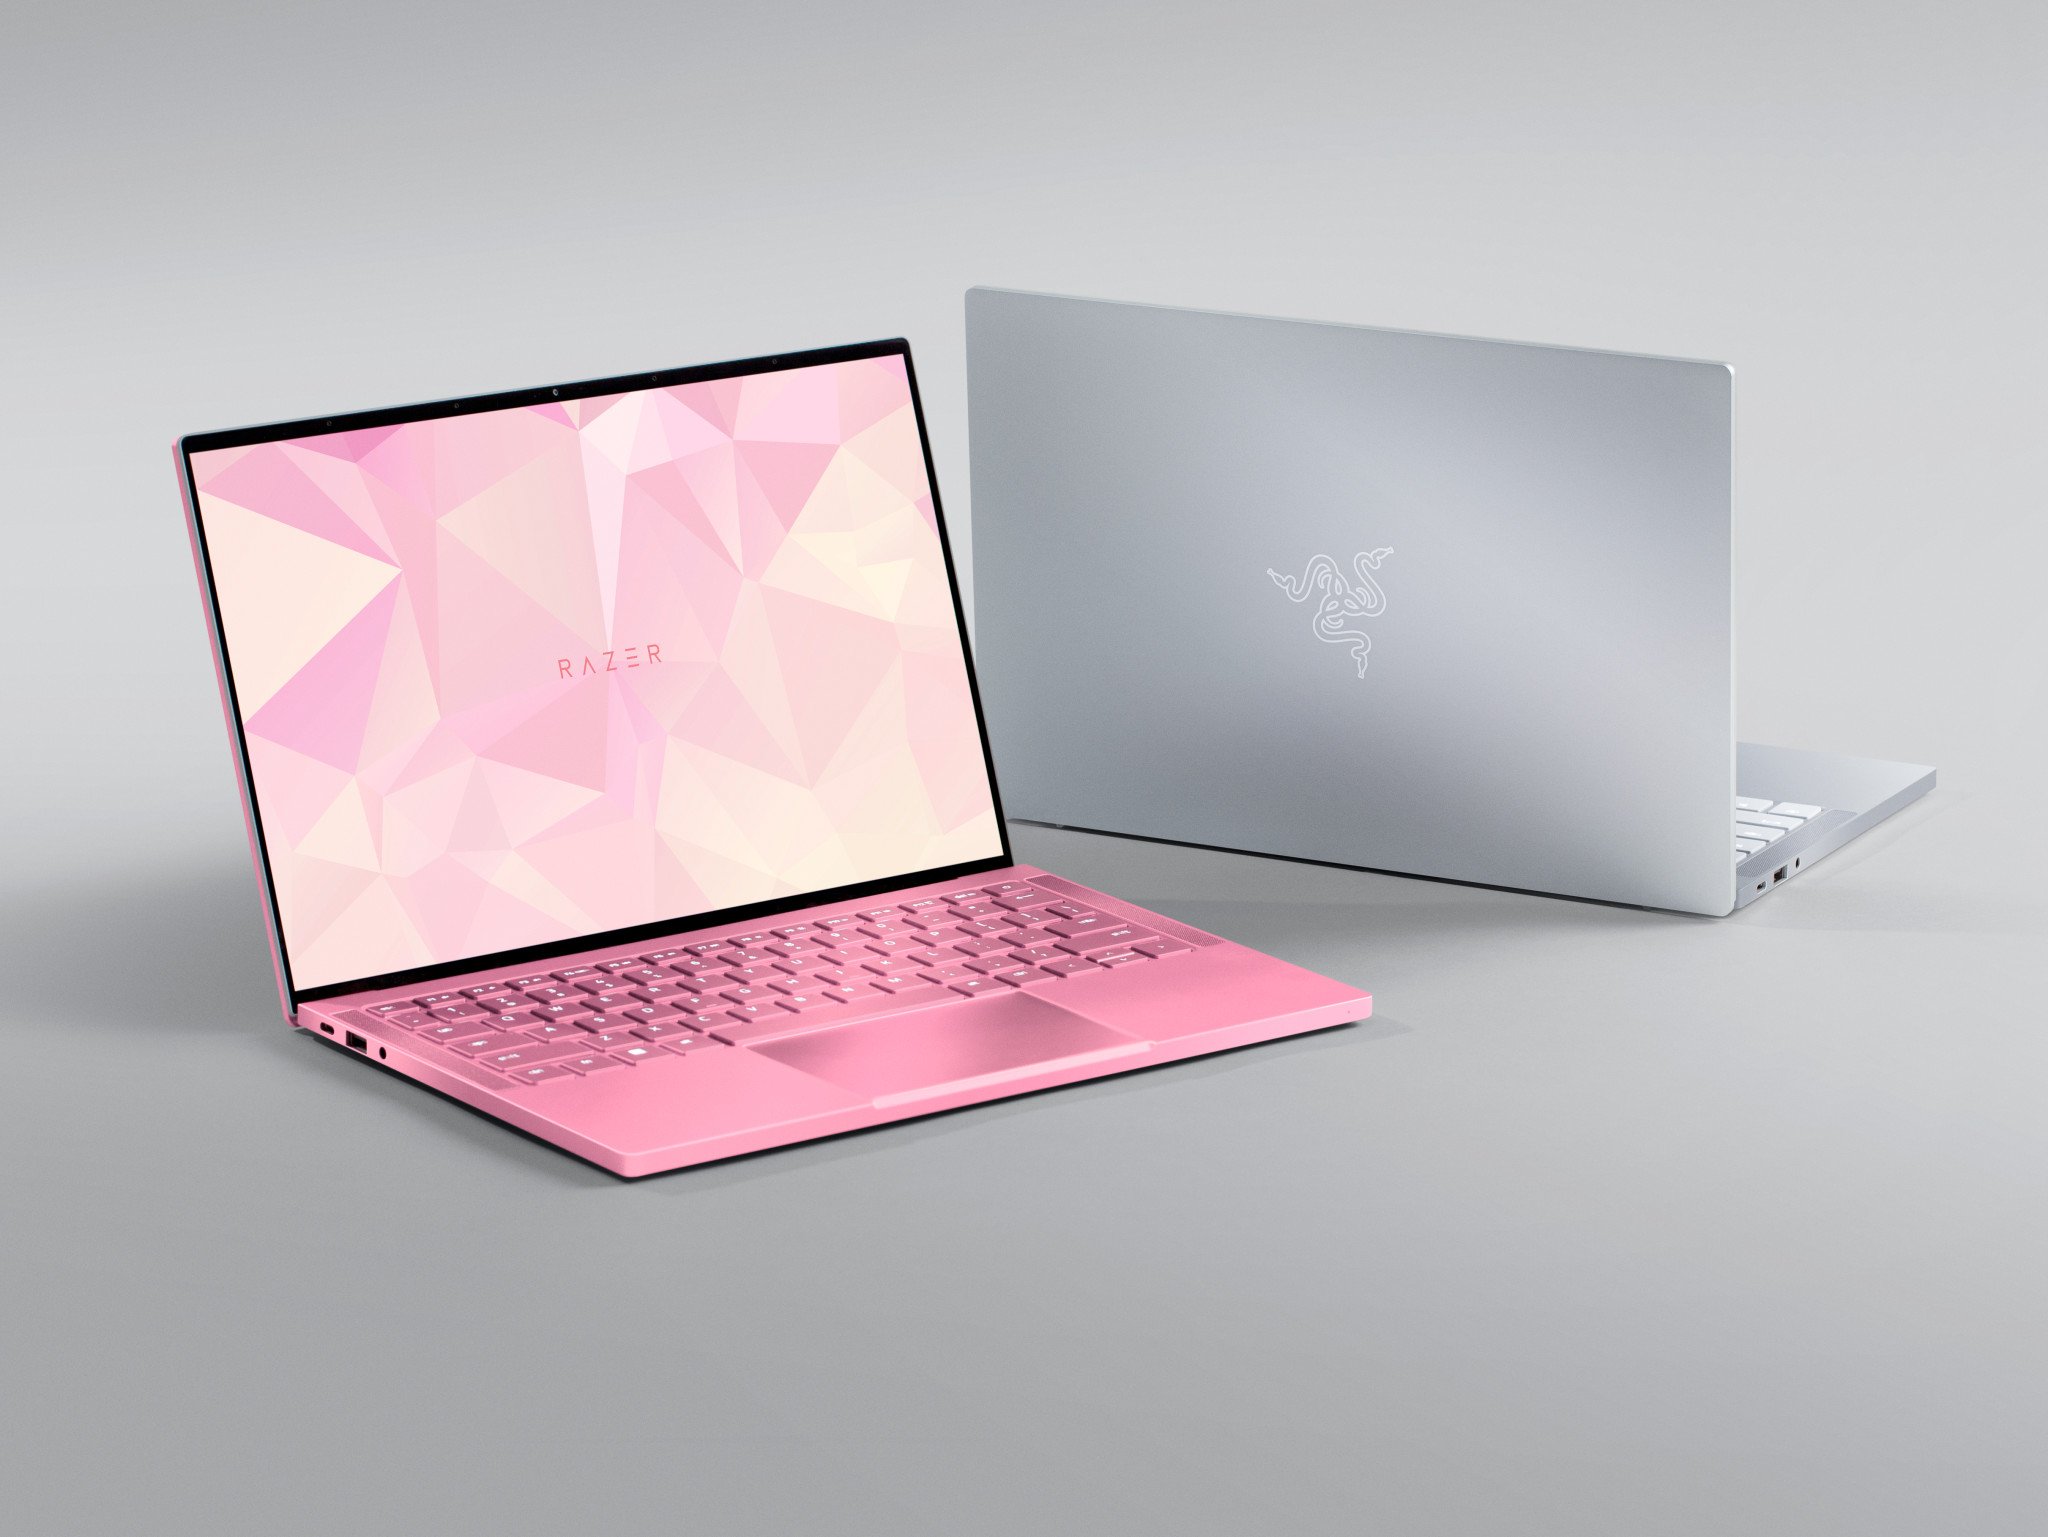 Razer Book now available in Quartz pink and with Windows 11 | Windows Central